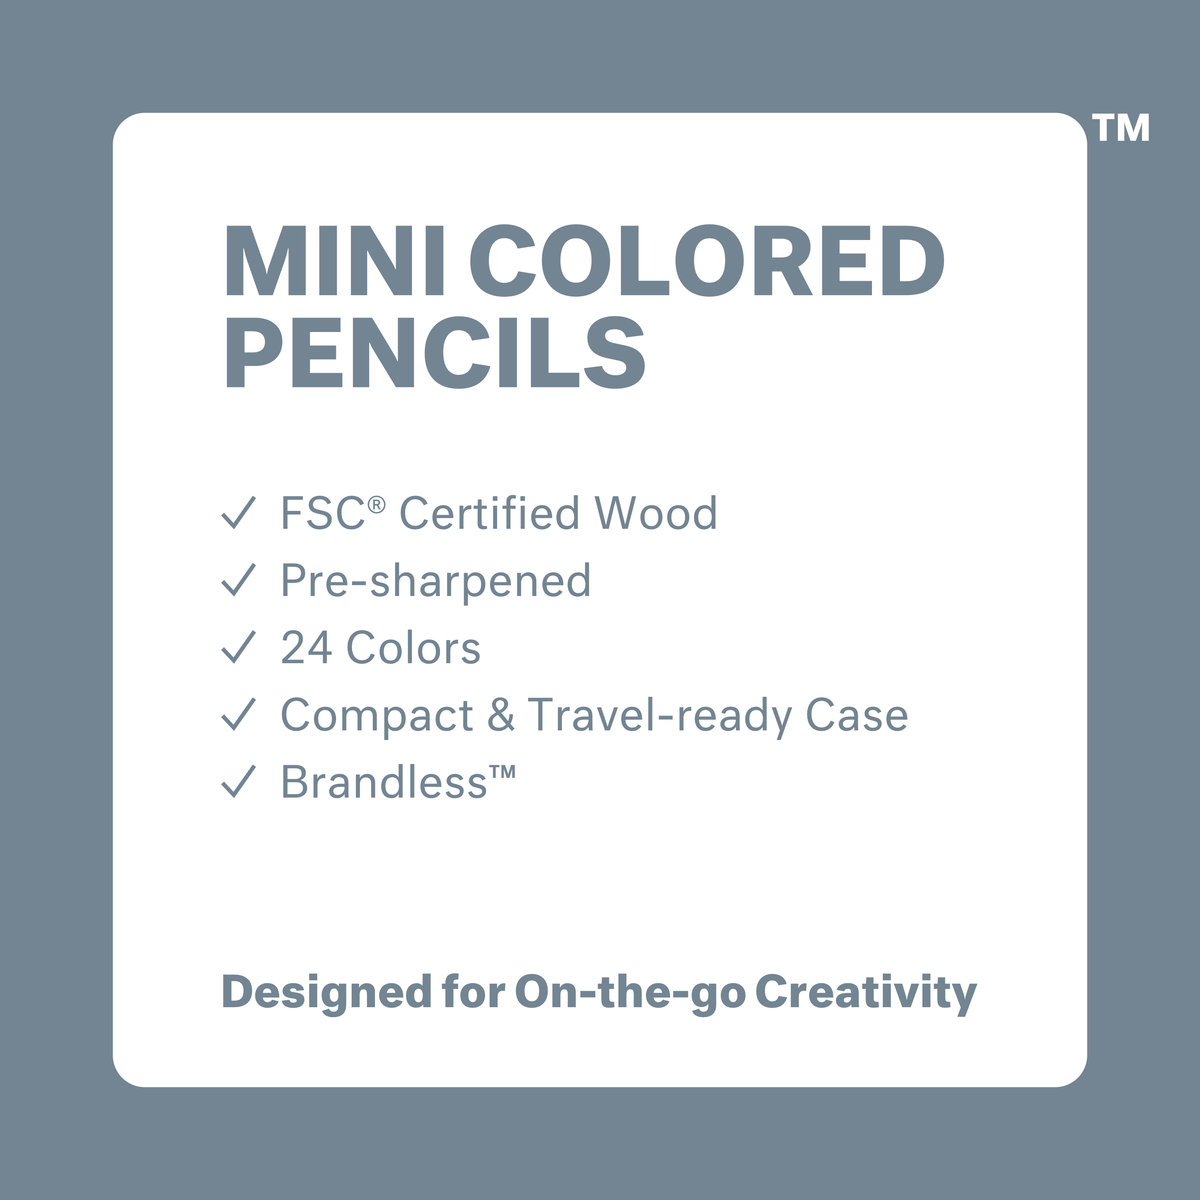 Mini Colored Pencils. FSC certified wood. Pre-sharpened. 24 colors, Compact &amp; travel-ready case. Brandless. Designed for on-th-go creativity.